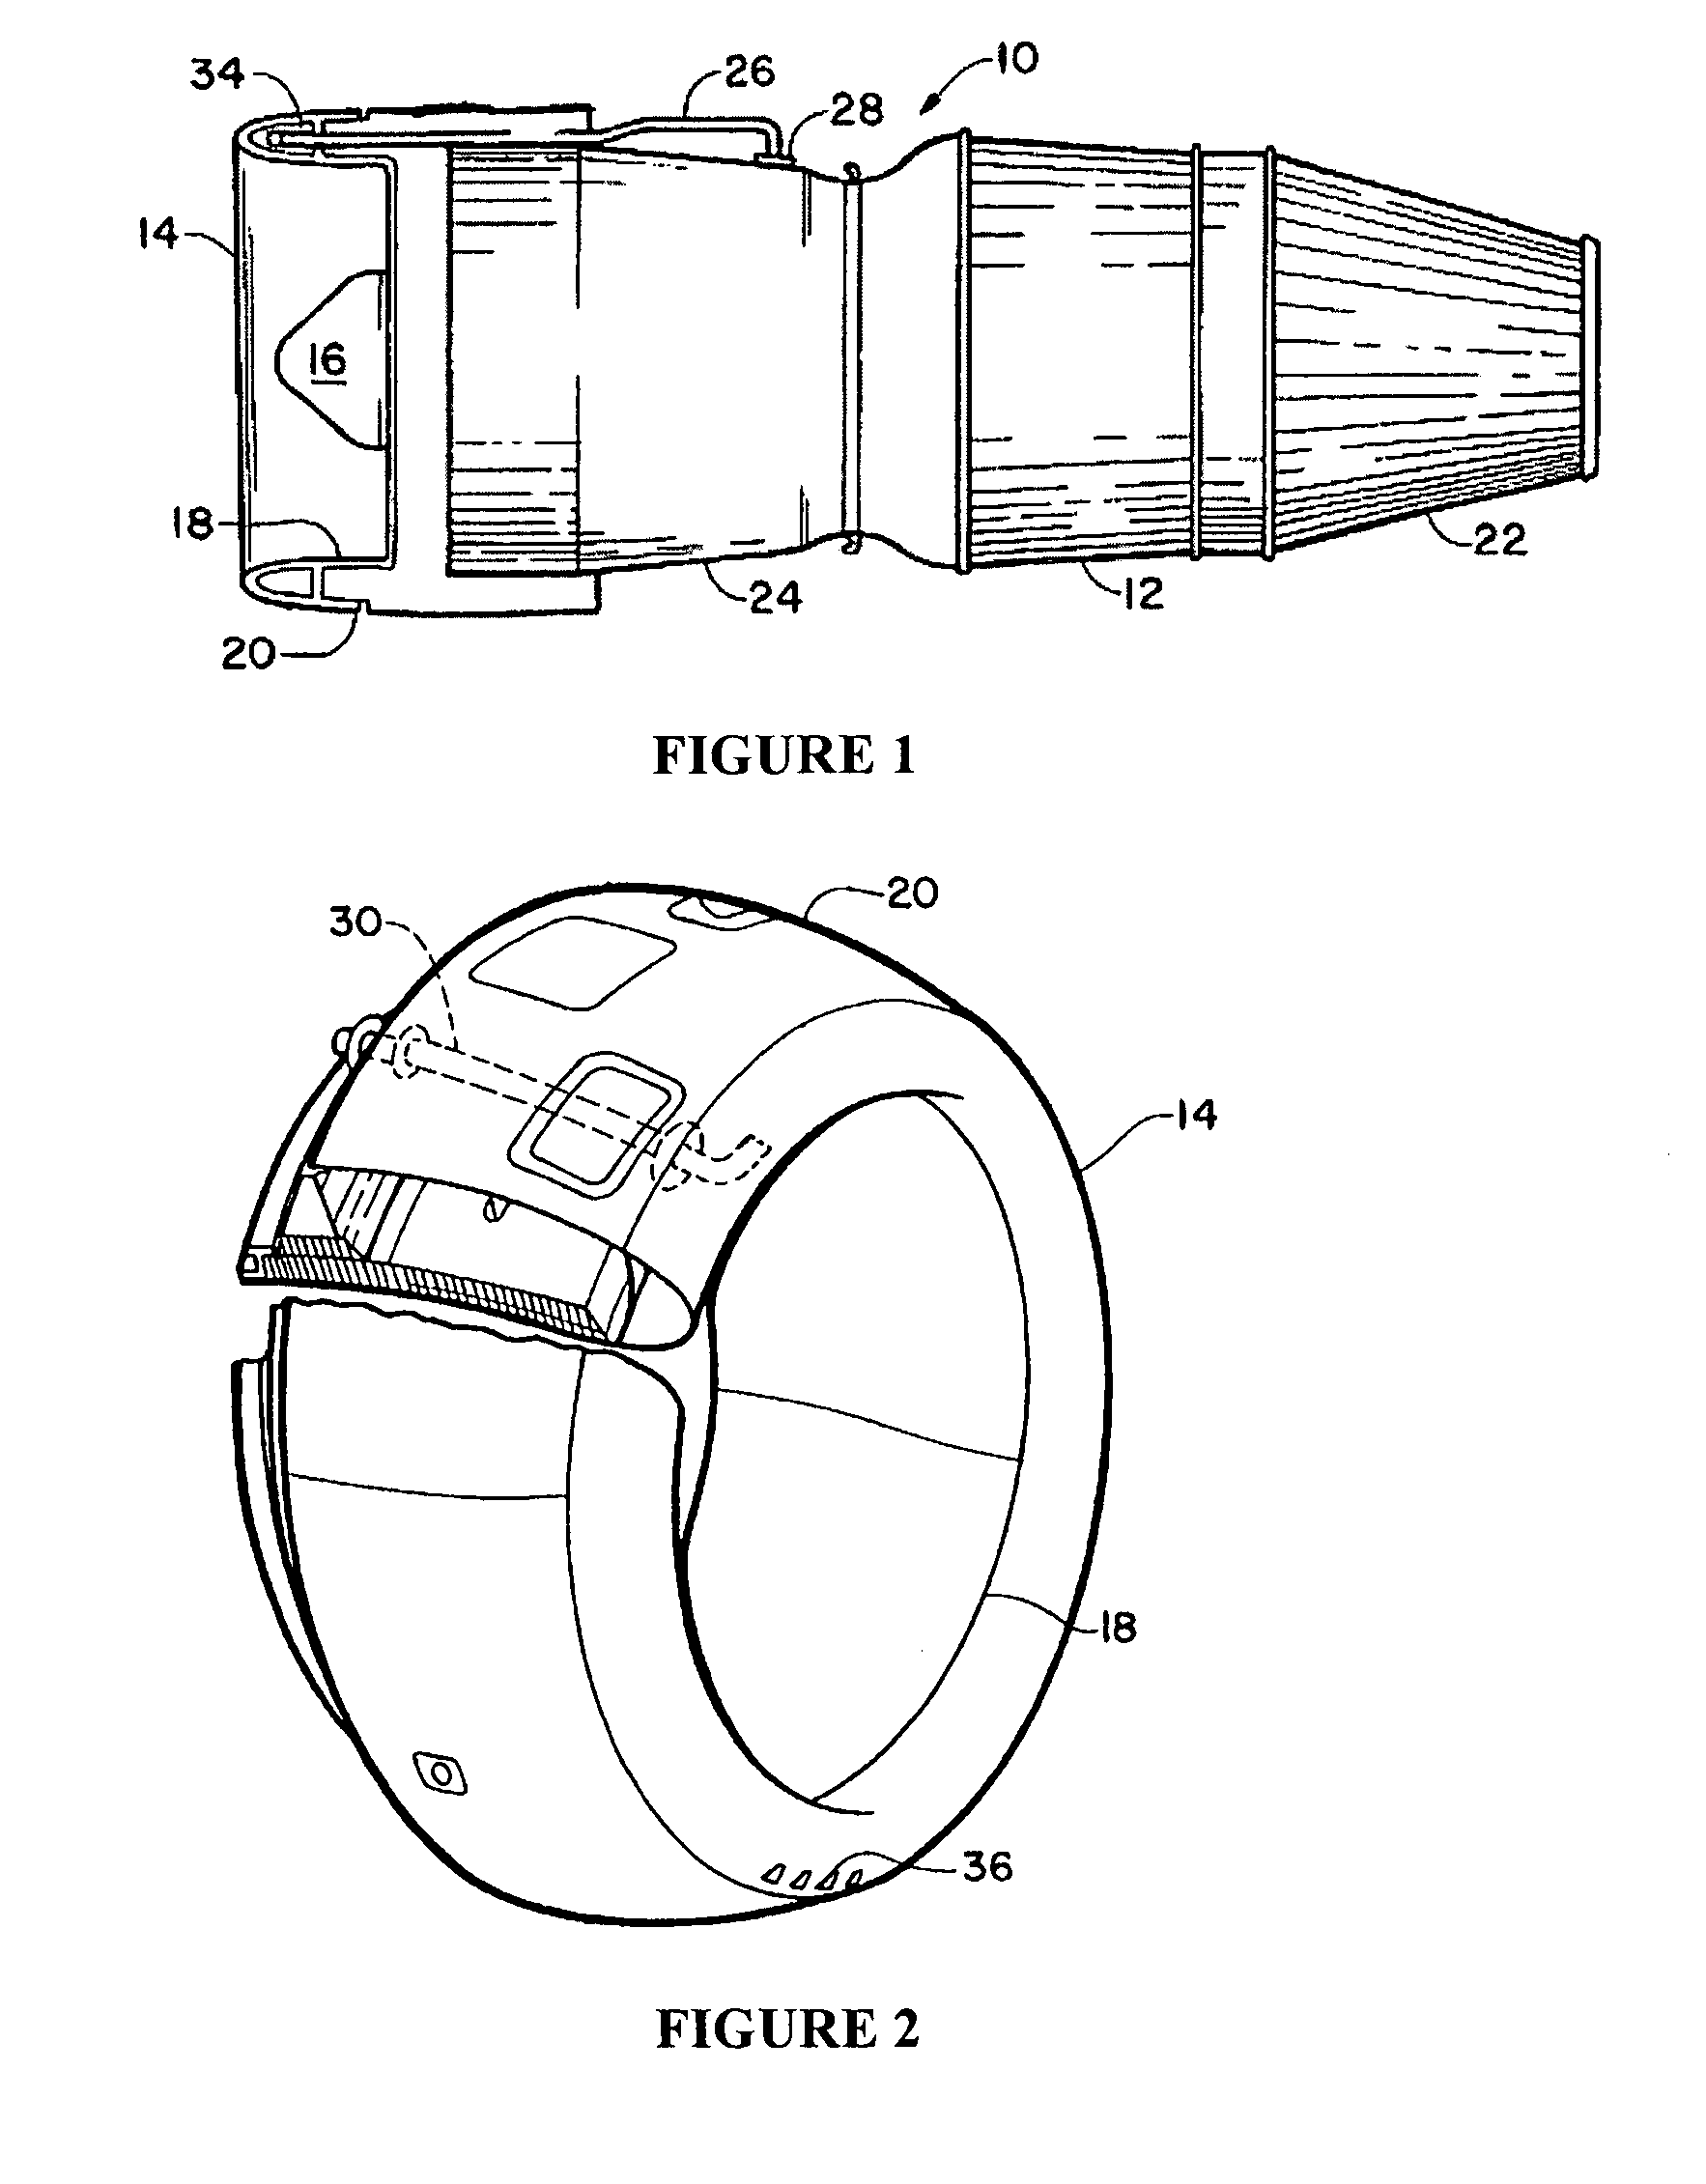 Method and apparatus for aircraft anti-icing